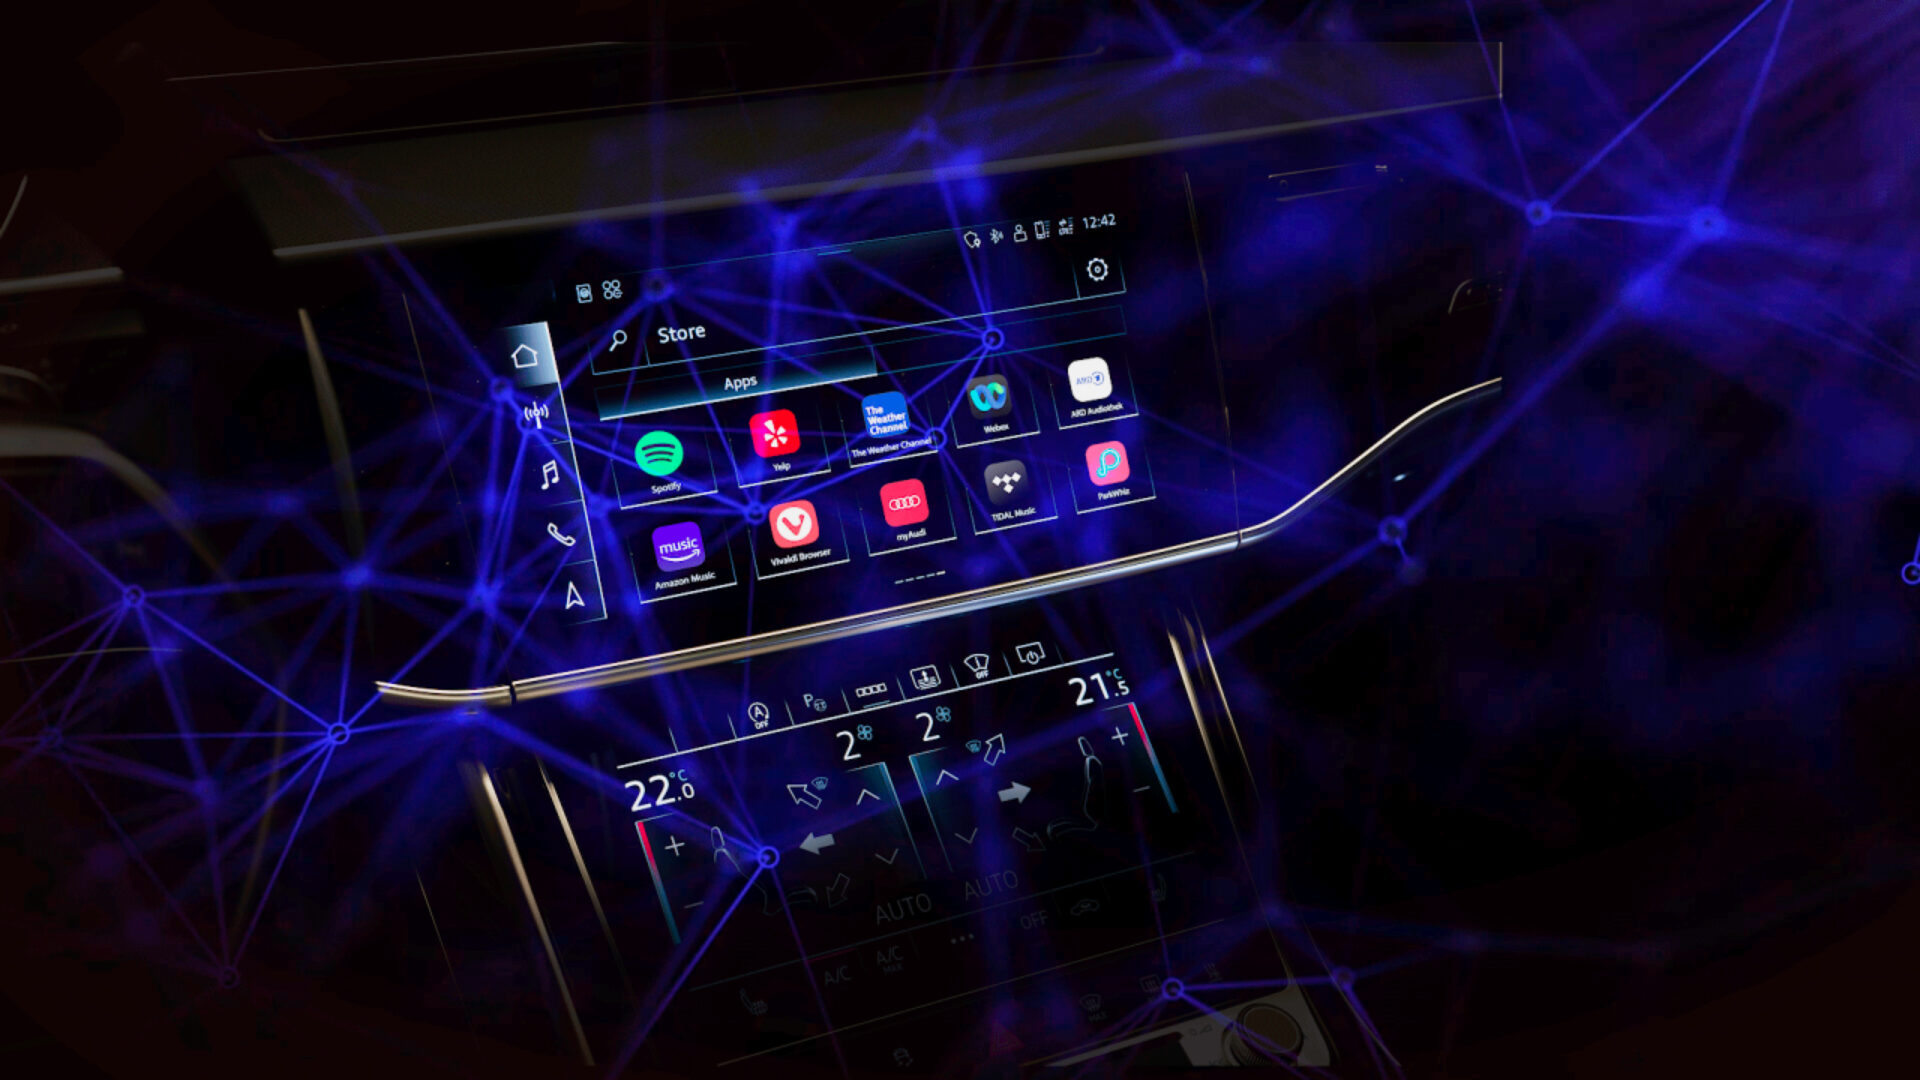 App store for cars developed in collaboration with Samsung's - SamMobile